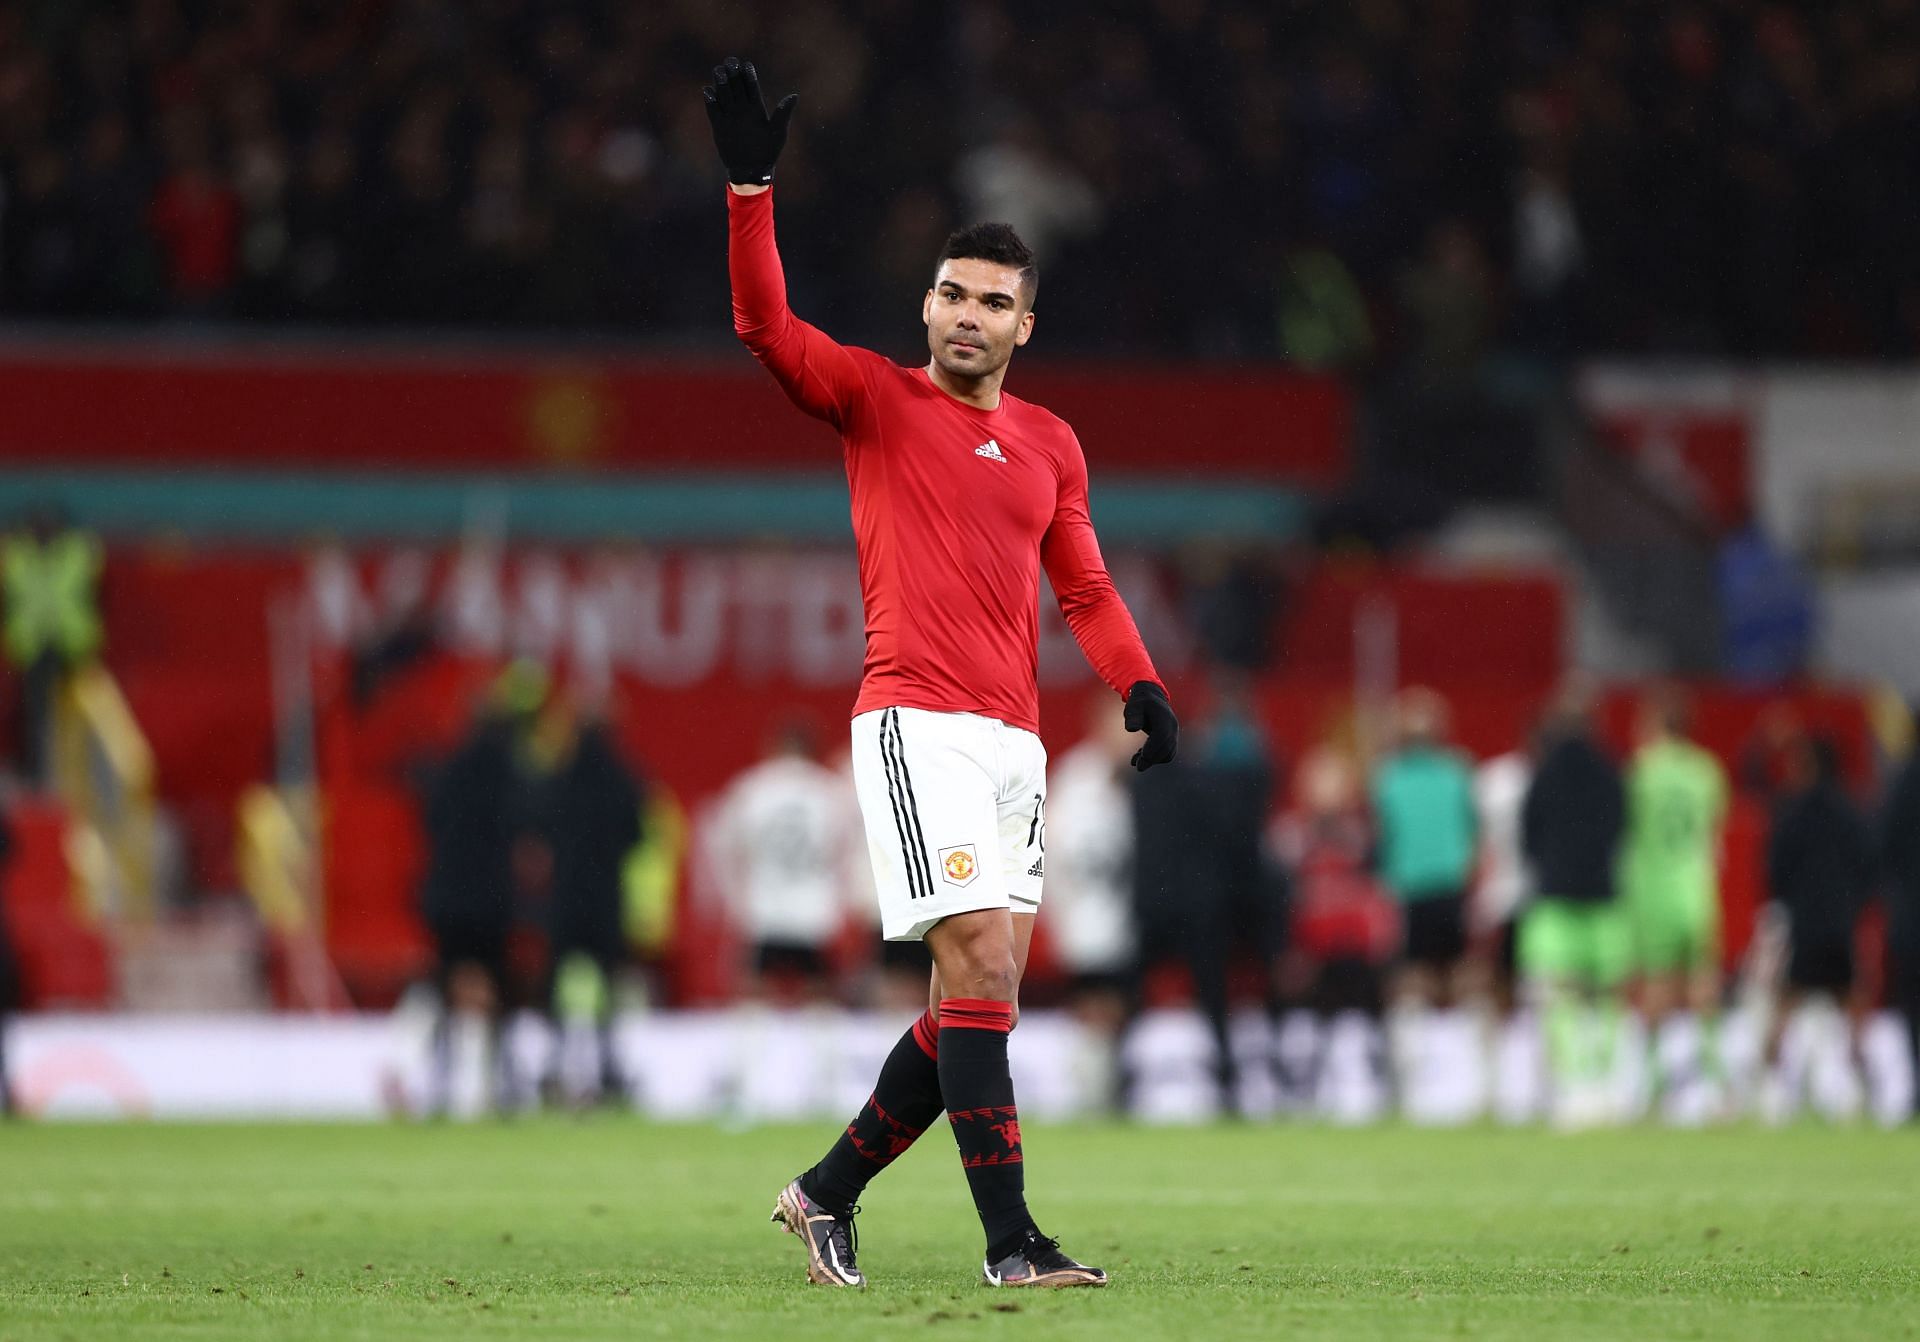 Casemiro was sensational for the Red Devils.